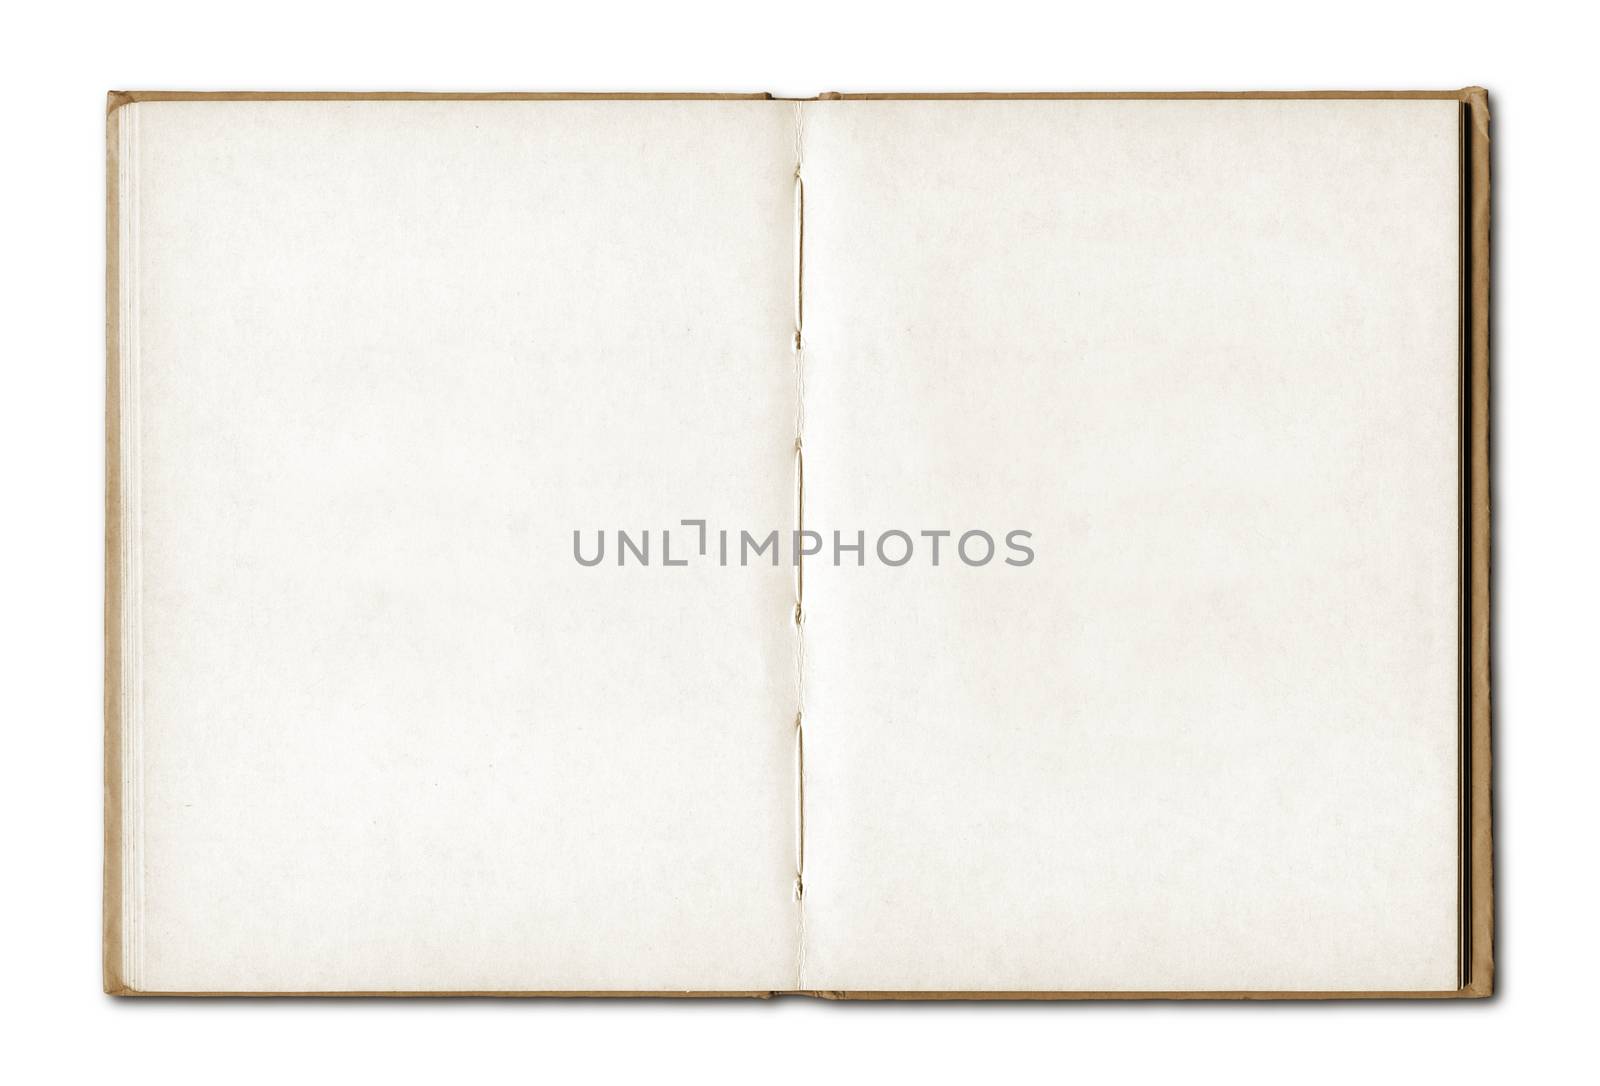 Vintage blank open notebook isolated on white with clipping path